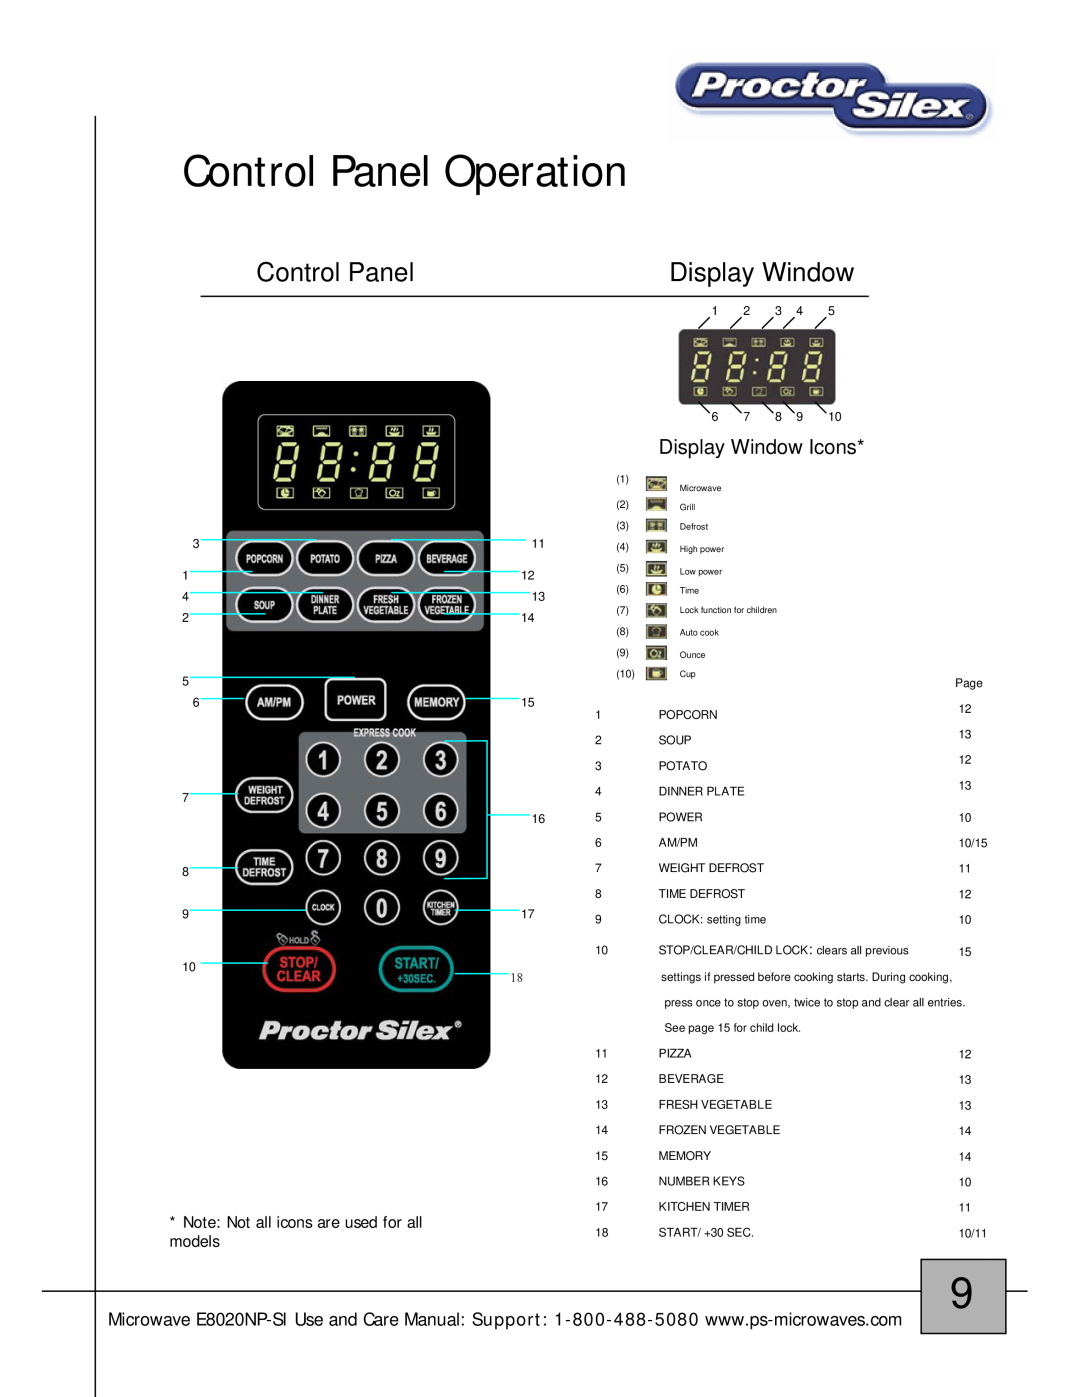 Proctor-Silex E8020NP-SI Control Panel Operation, Display Window Icons, Note Not all icons are used for all models 